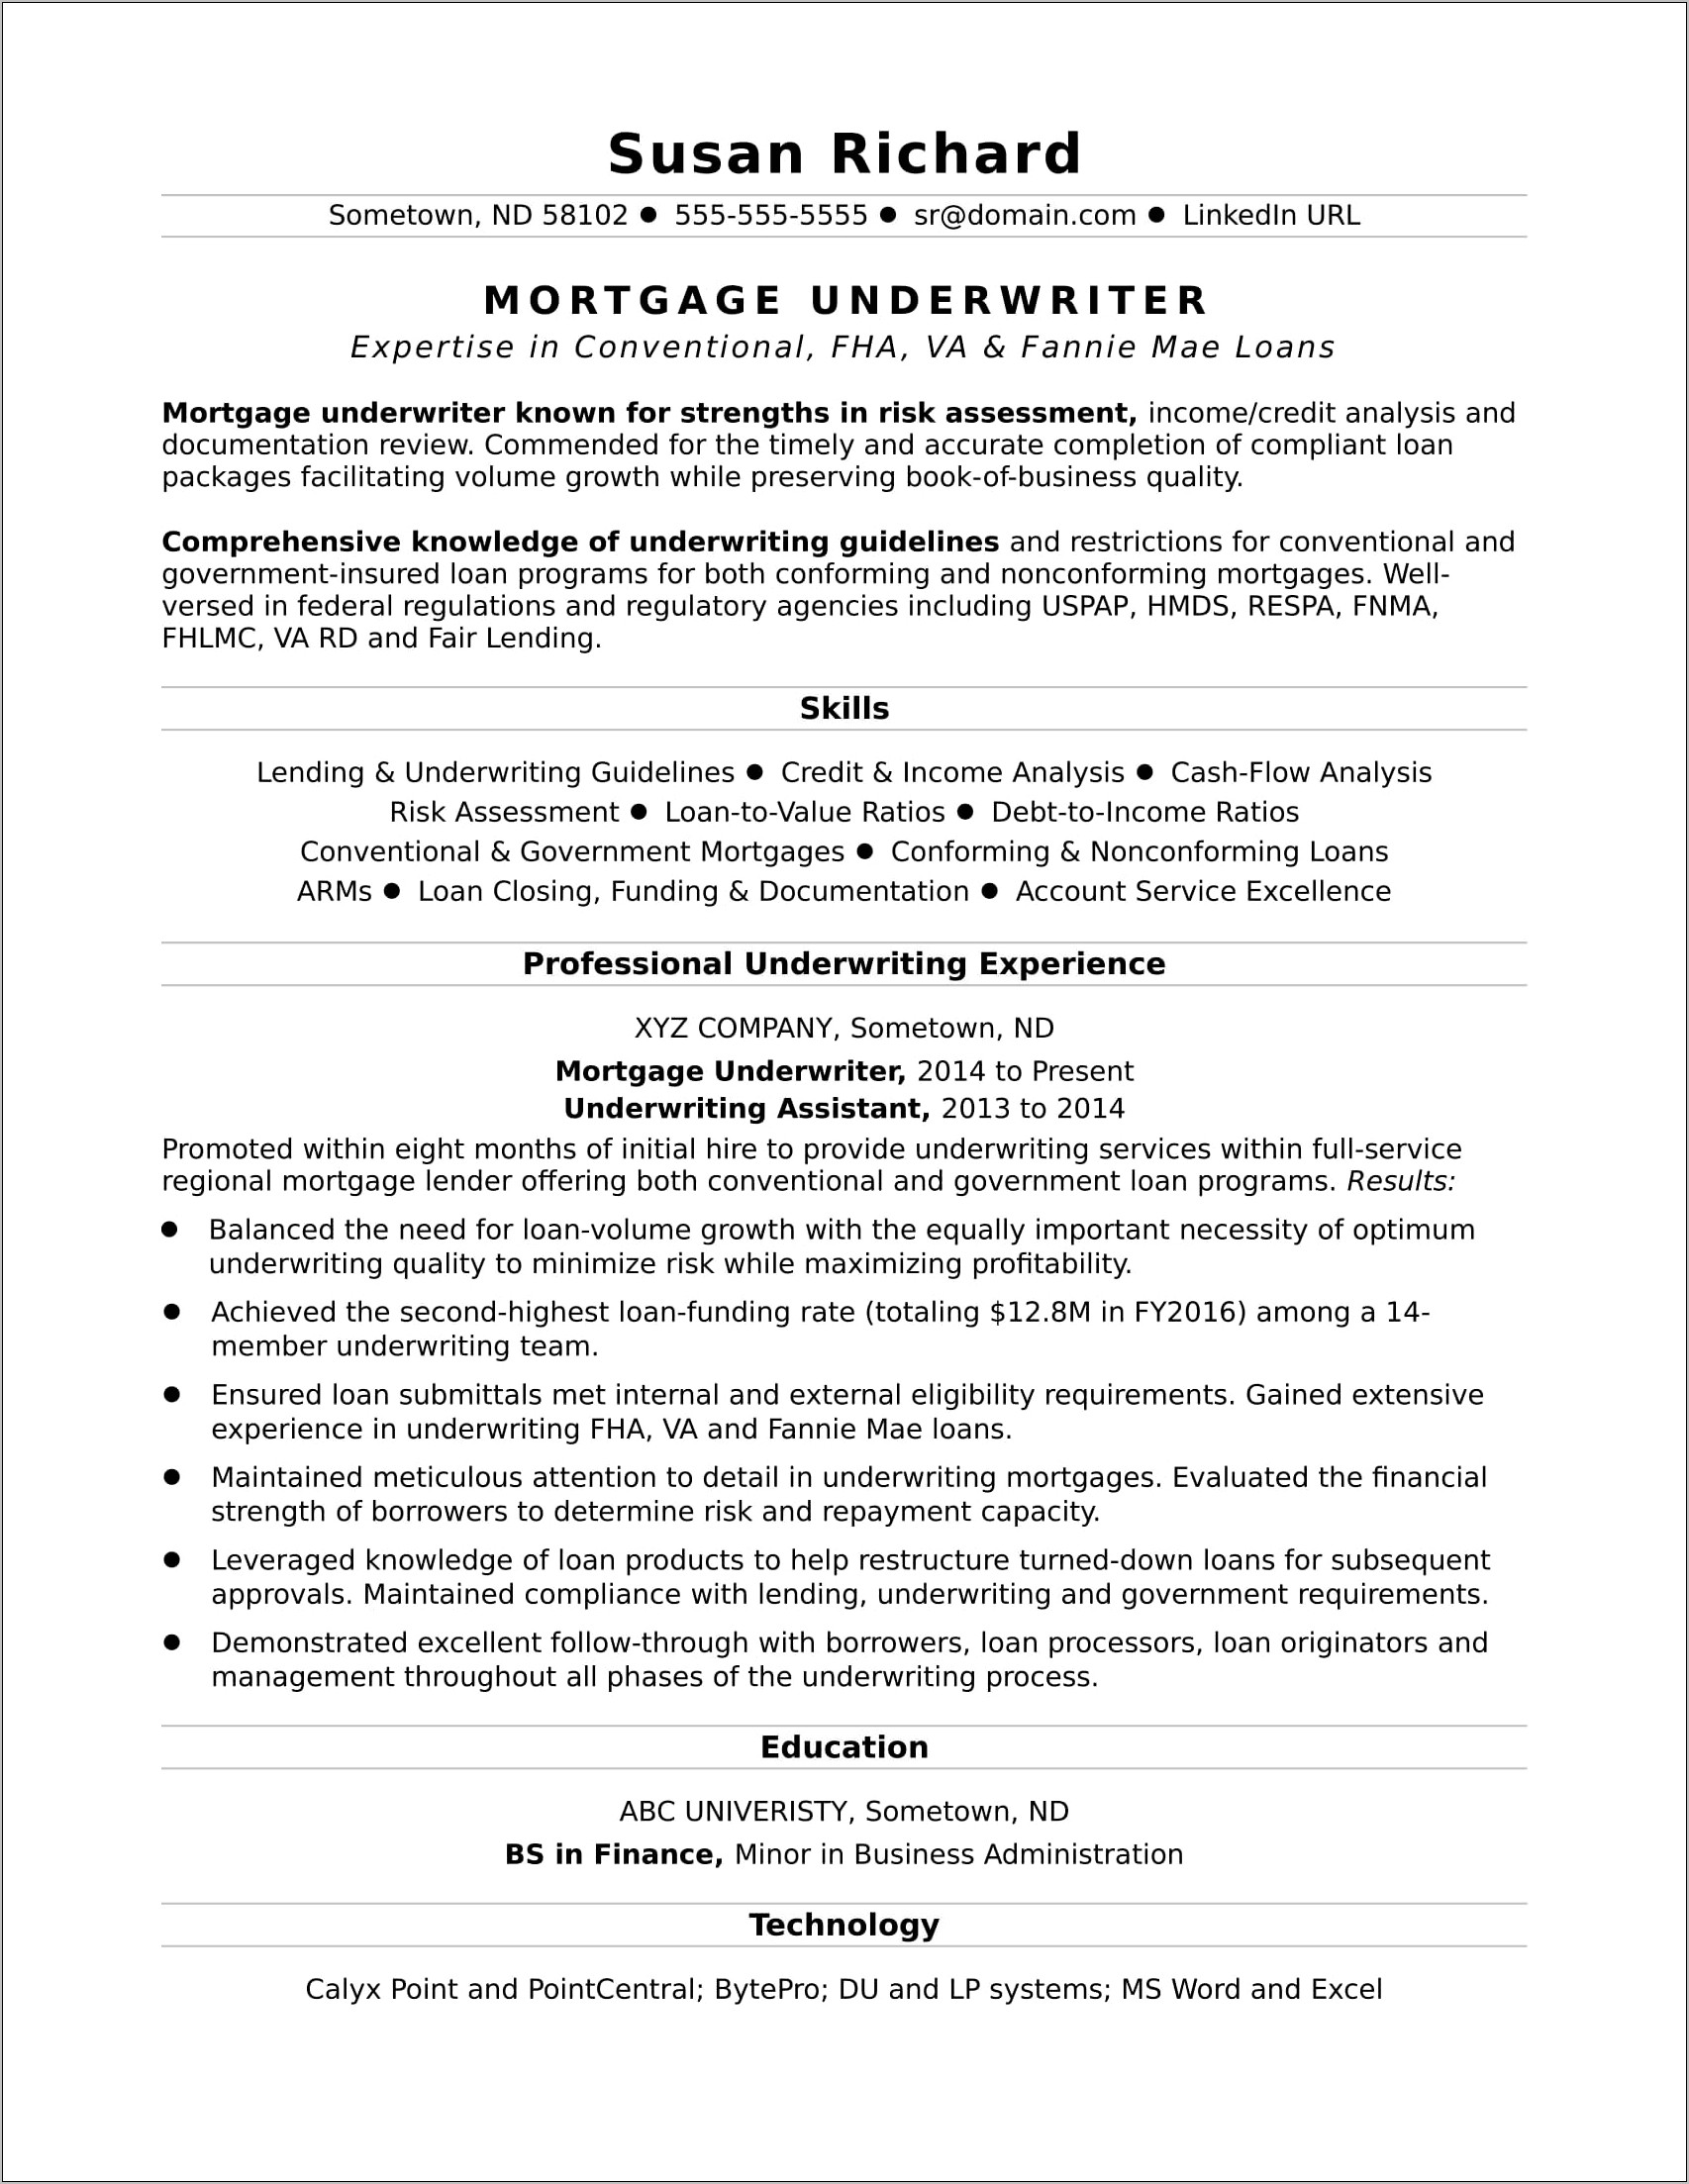 Commercial Insurance Underwriting Assistant Sample Resume